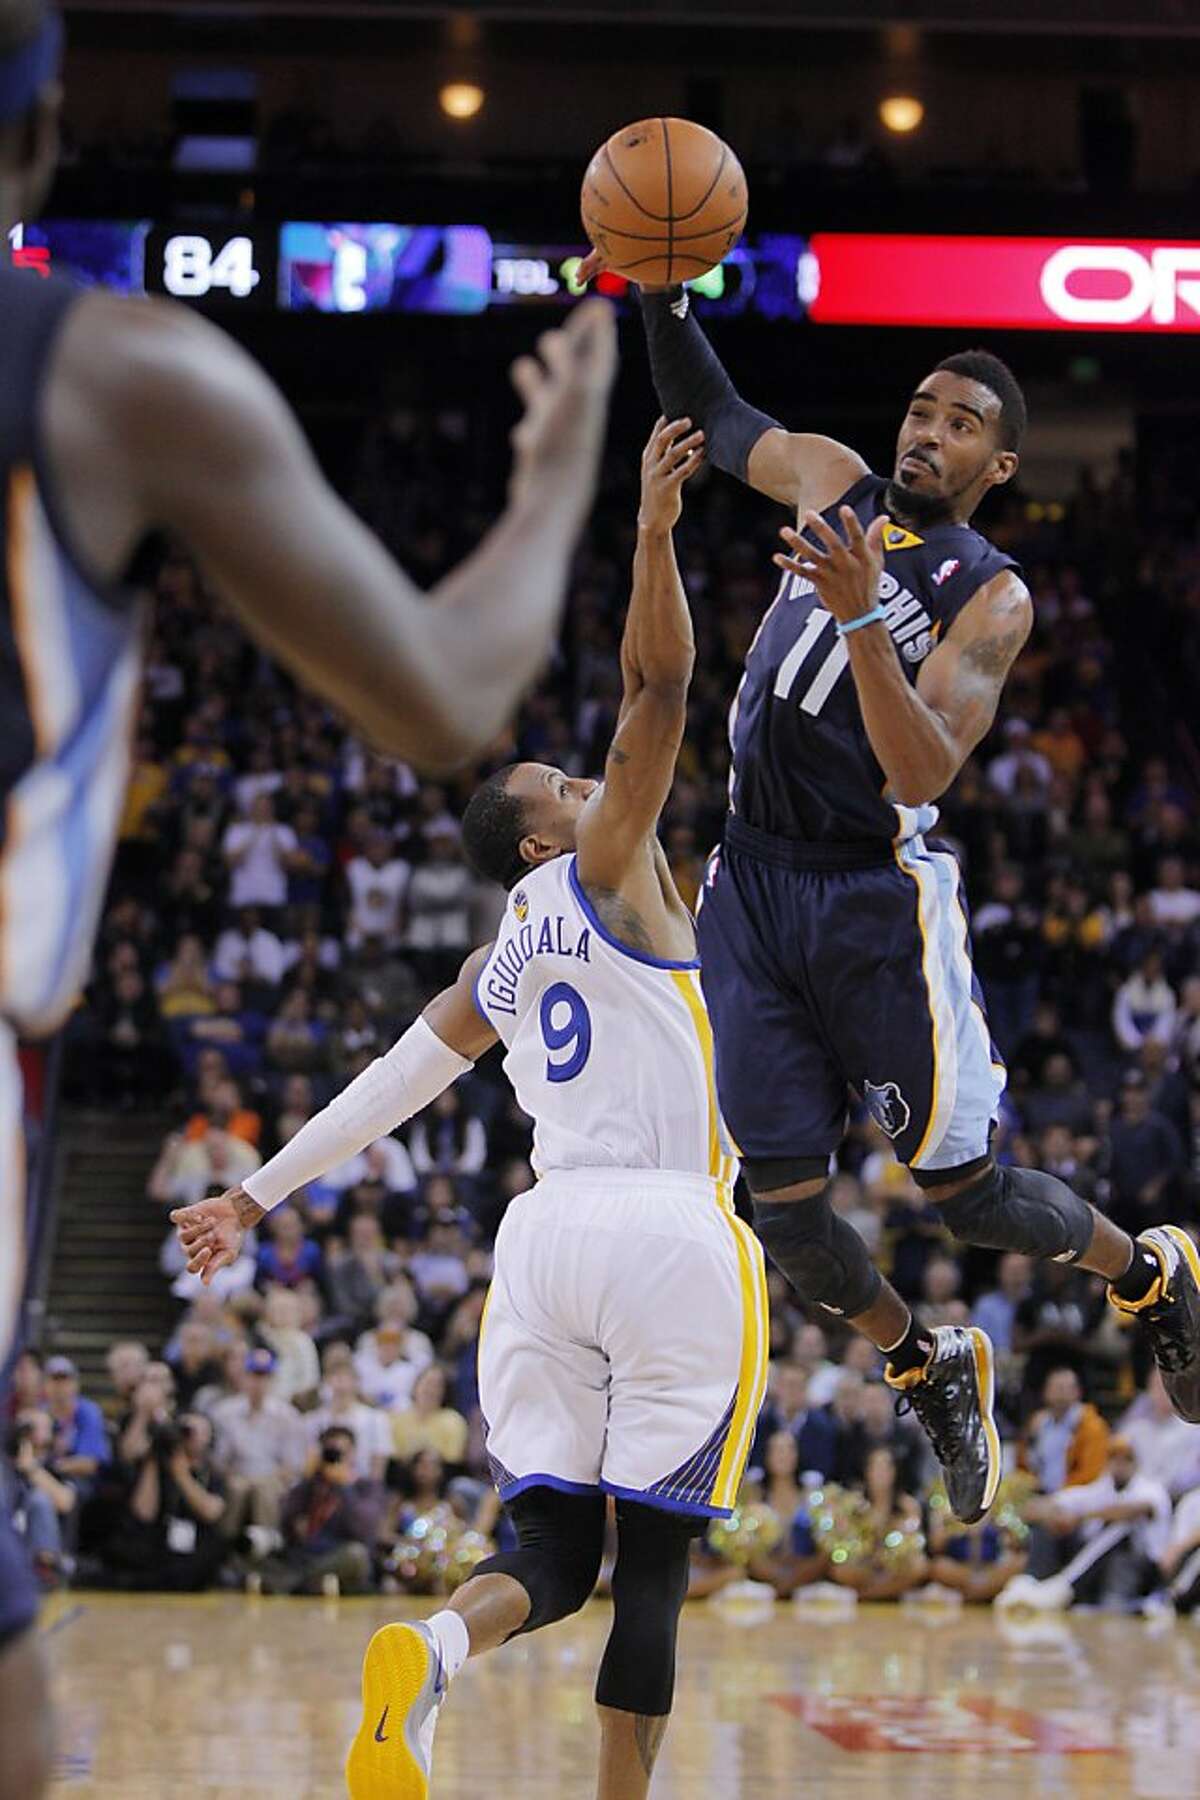 Mike Conley (11) gets up for a tipped pass over Andre Iguodala in the second half. The Golden State Warriors played the Memphis Grizzlies at Oracle Arena in Oakland, Calif., on Wednesday, November 20, 2013. The Grizzlies won 88-81 in overtime.